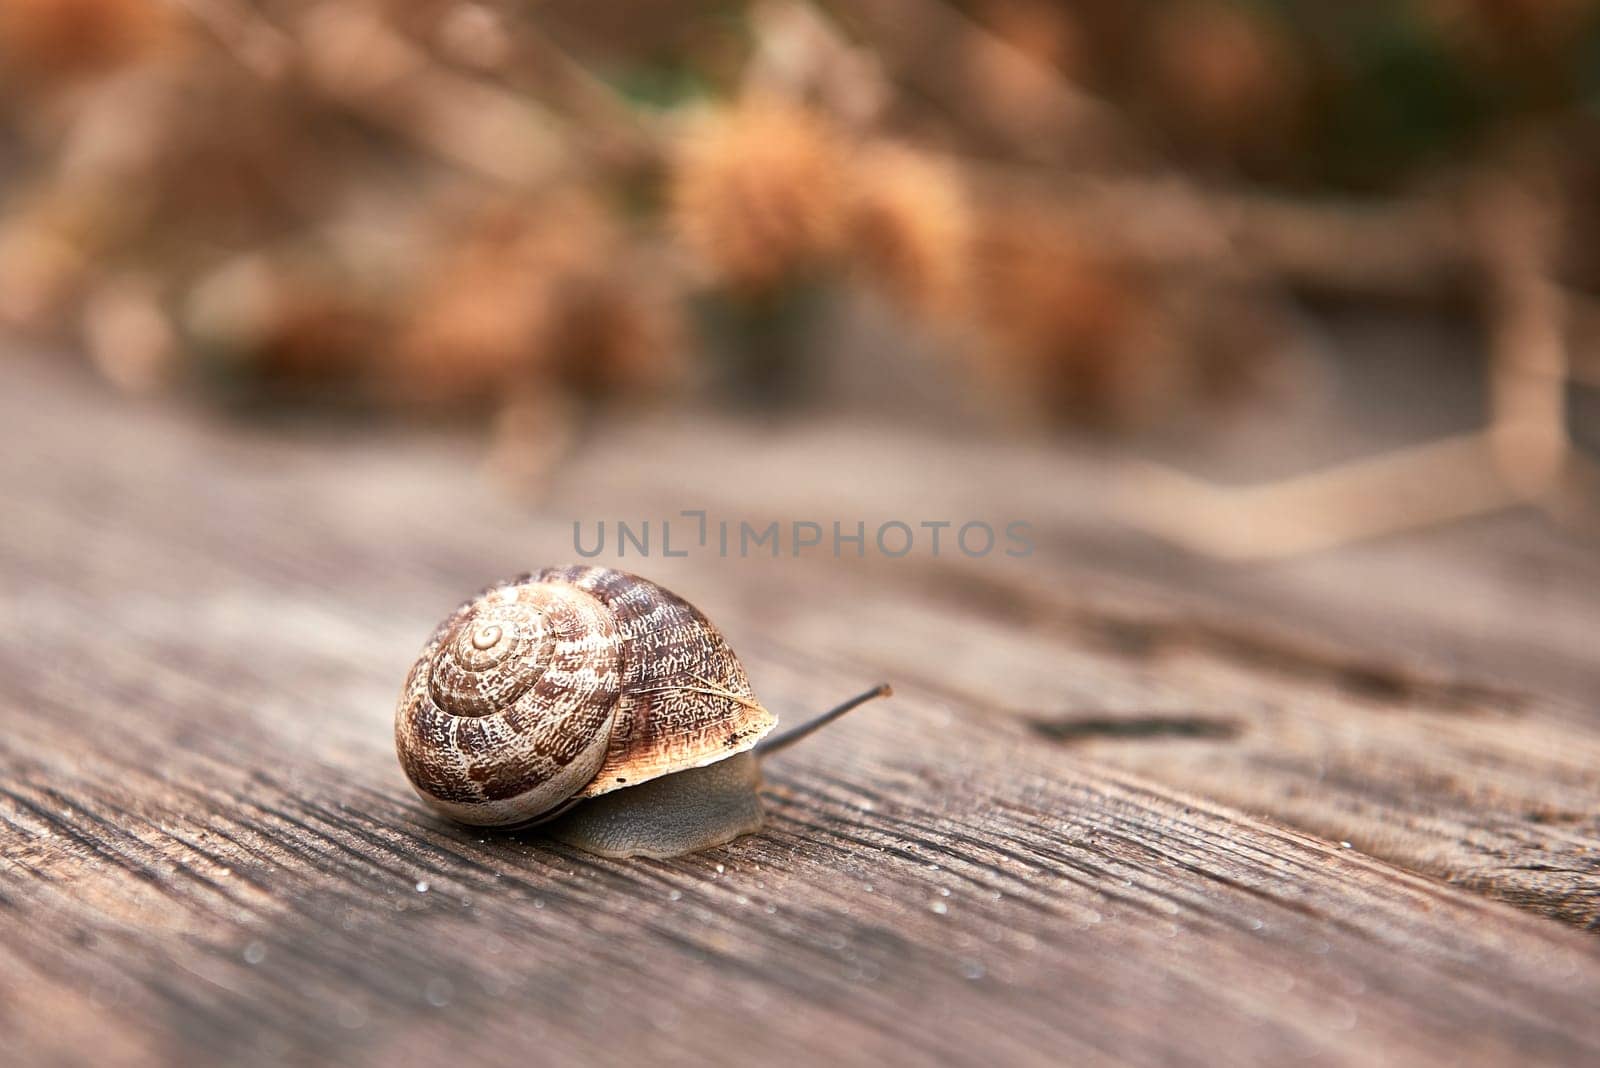 Snail on wooden board. out-of-focus background. Wooden floor, texture, shades of grey, empty space, solitary